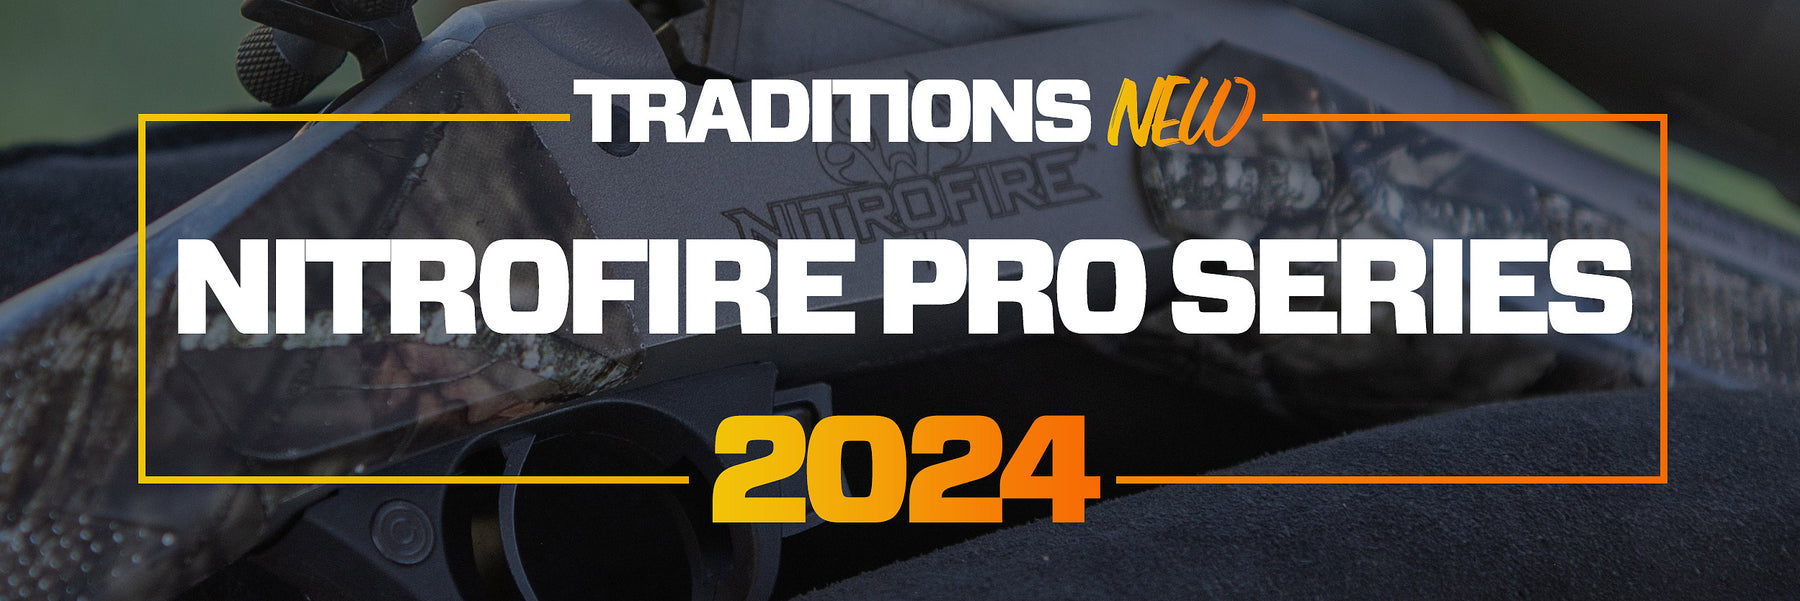 Introducing The Traditions NitroFire Pro Series Muzzleloader